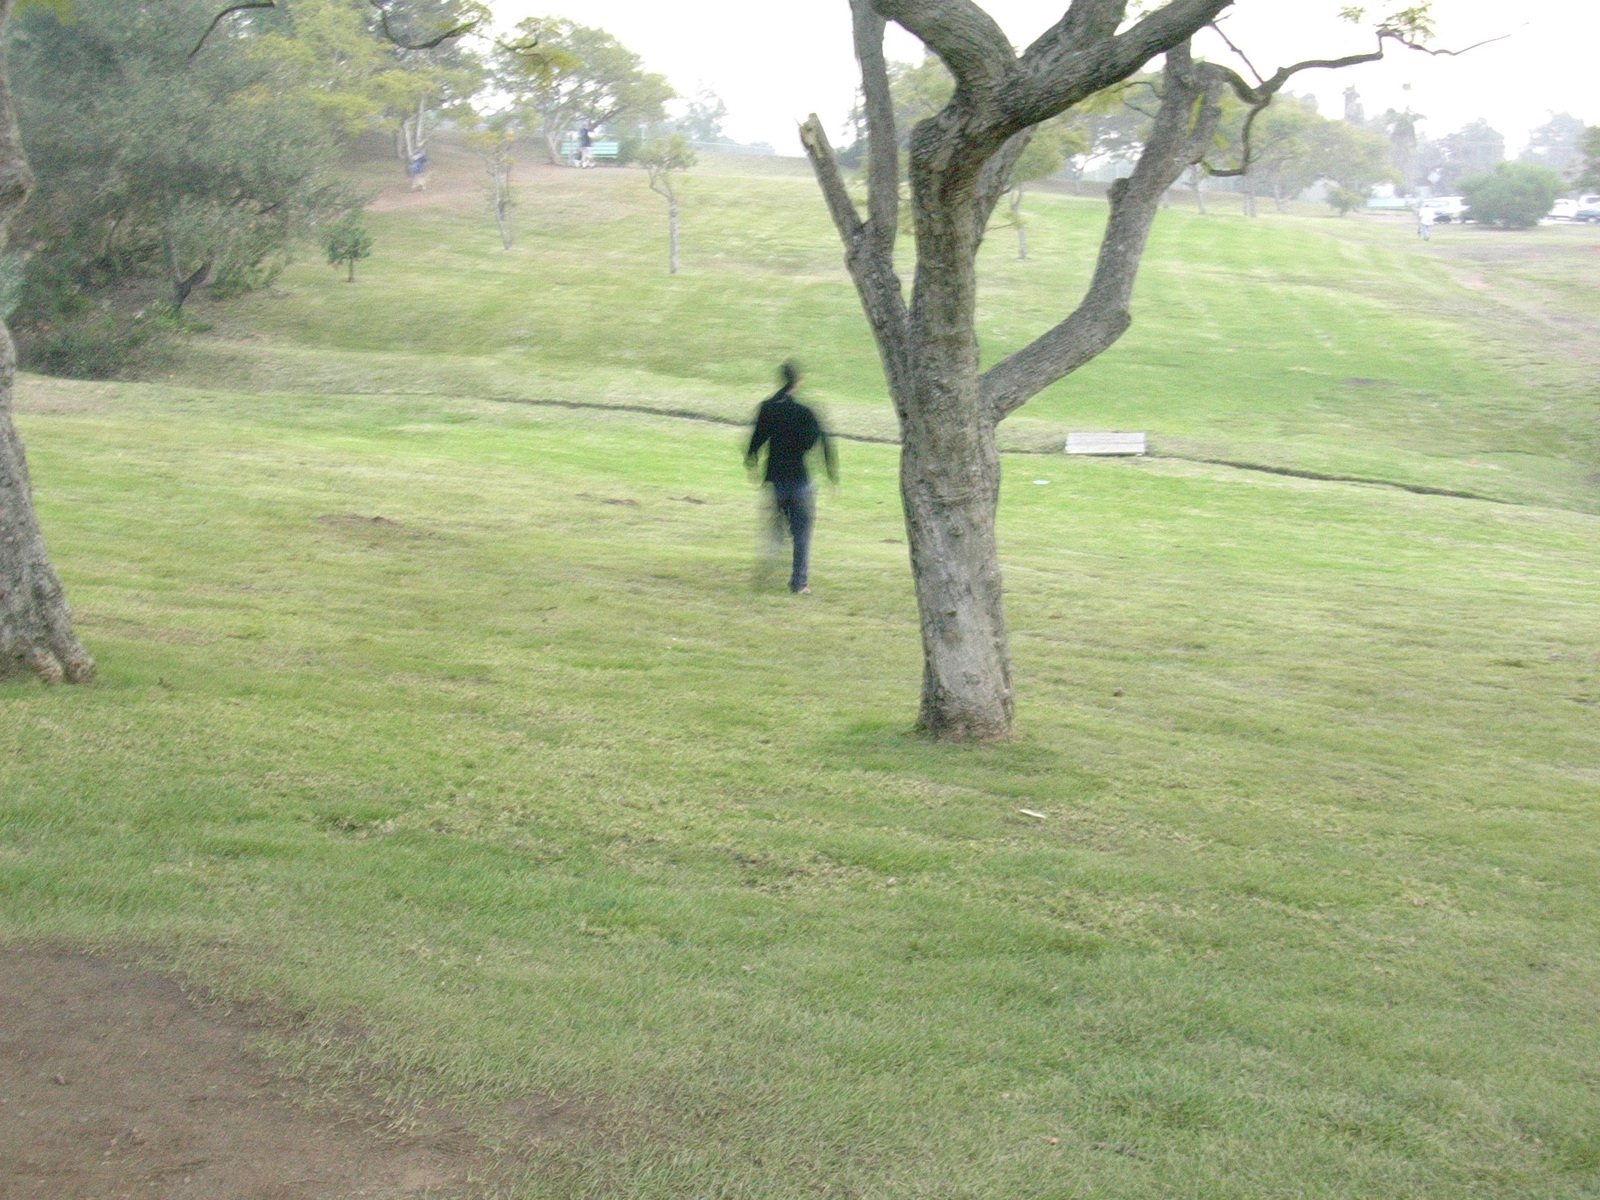 a person in the middle of some grass under trees